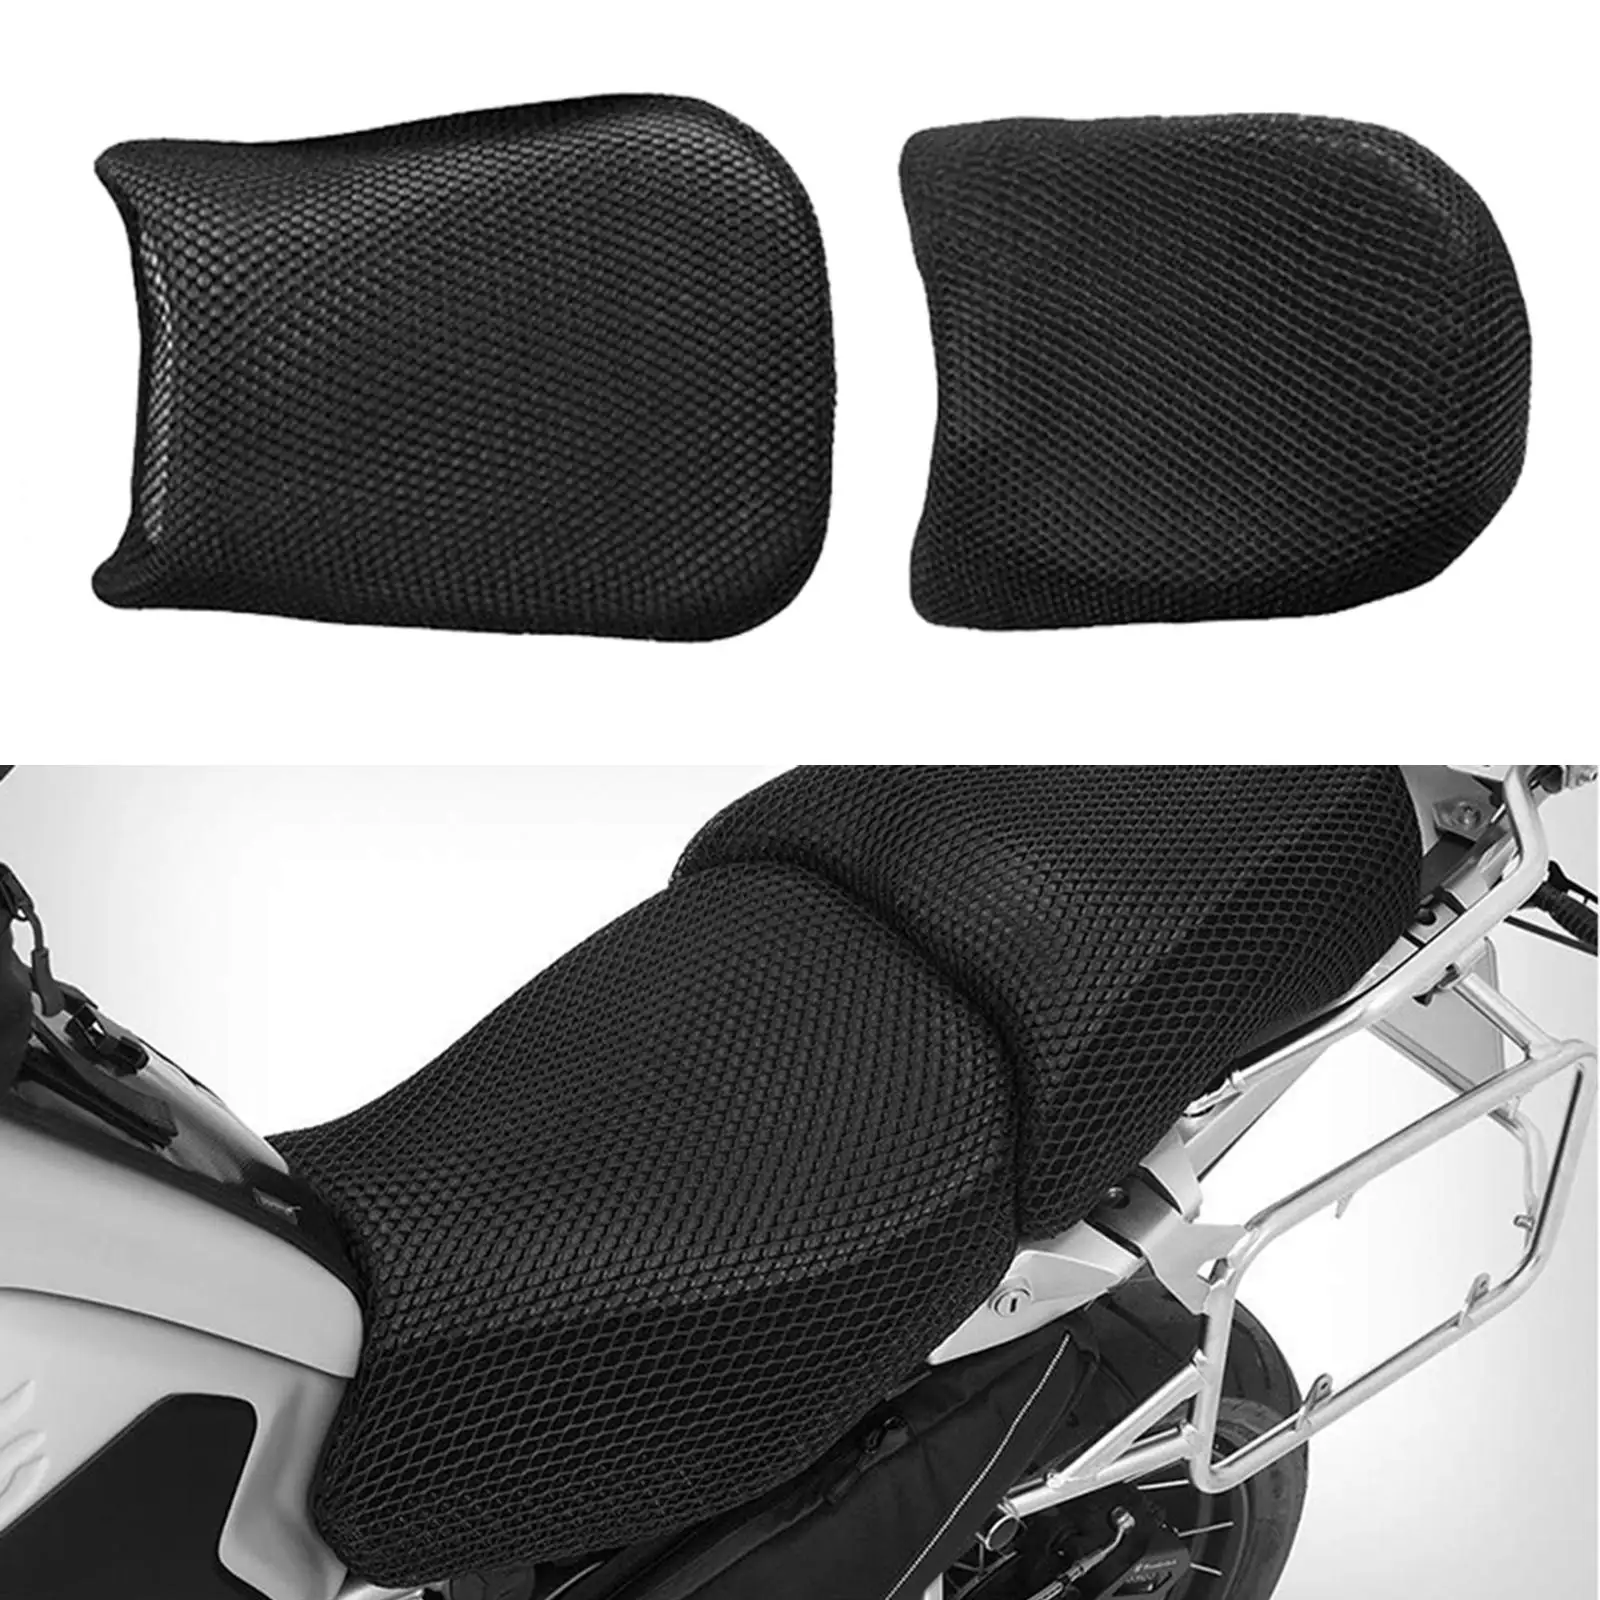 Motorcycle Bikes Protecting Pad Cover for R1200GS